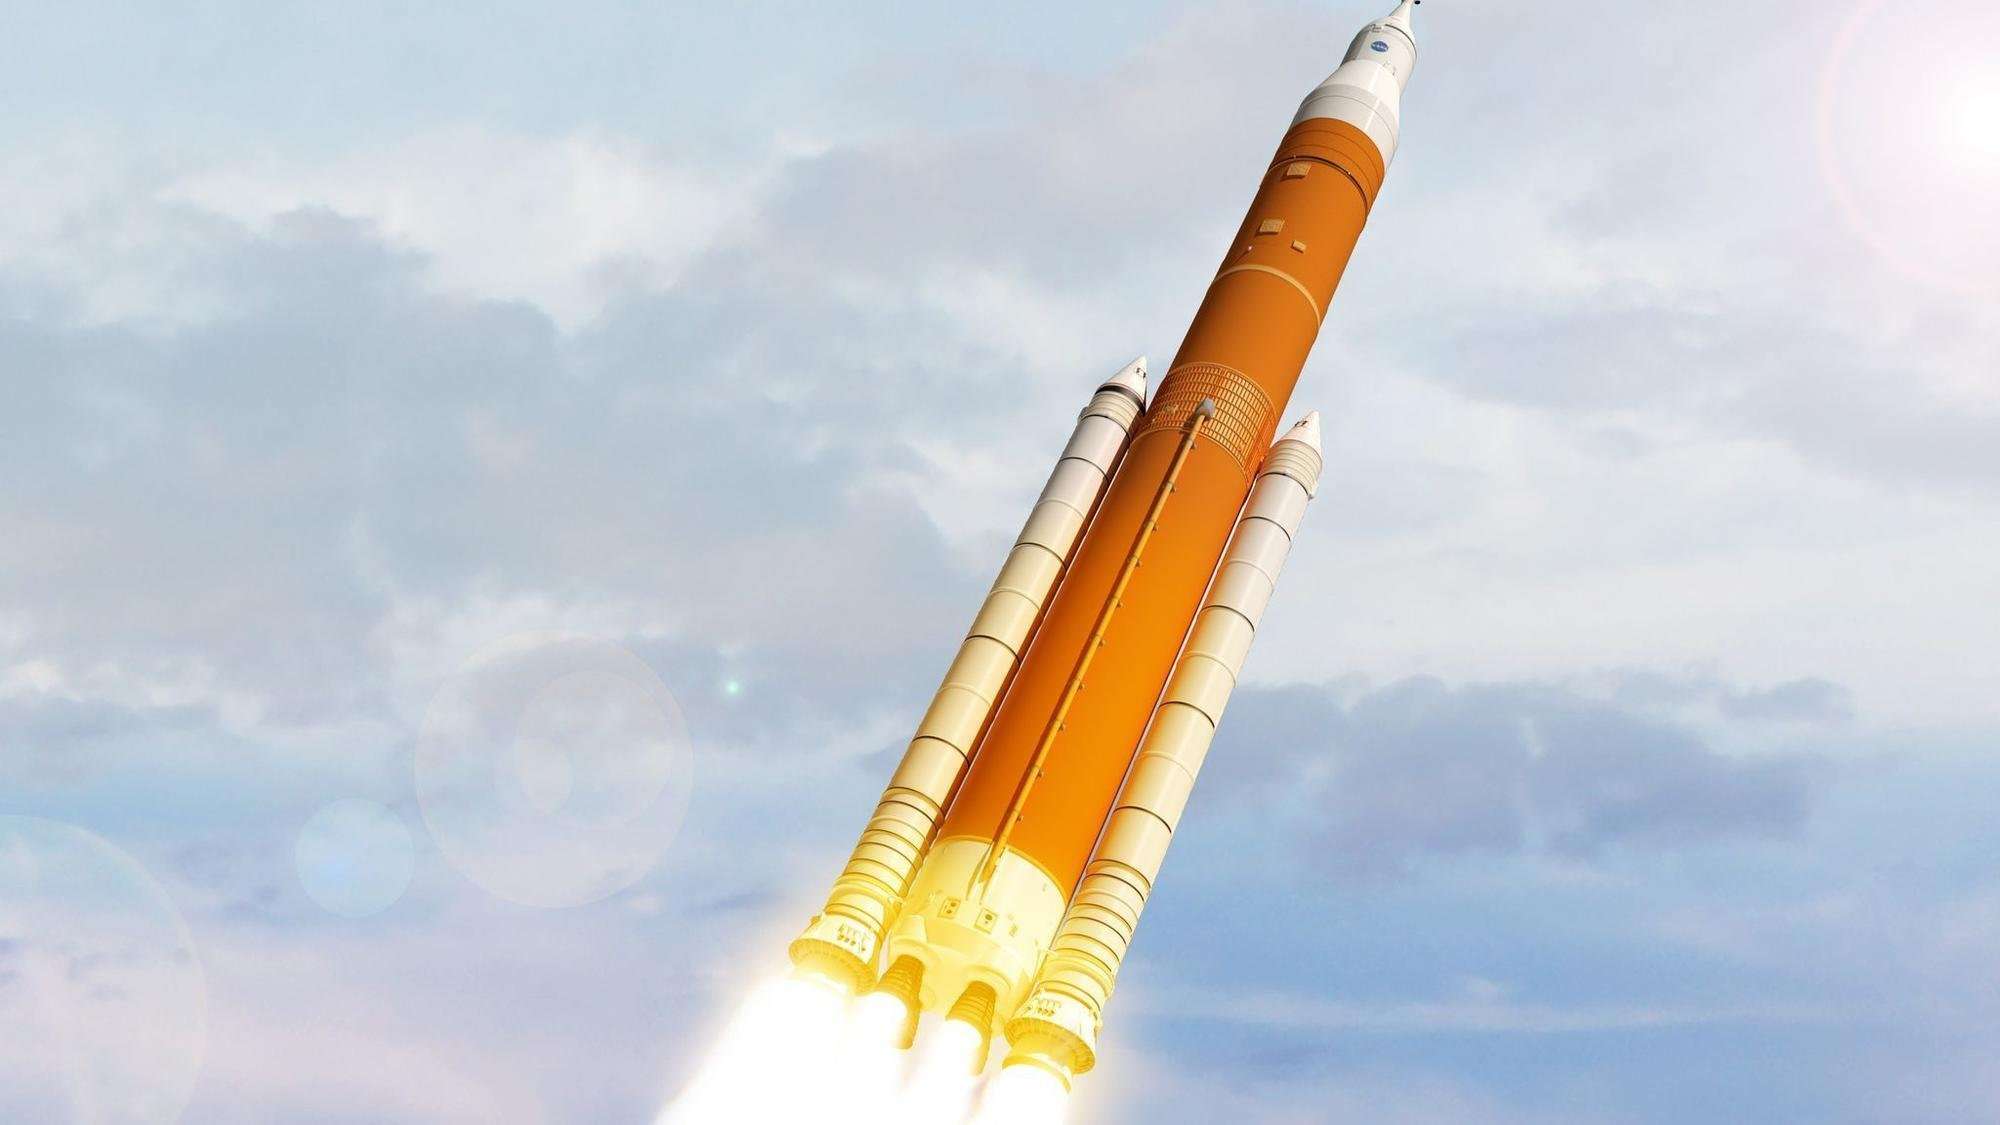 image for NASA's Mars rocket is behind schedule and over budget due to 'Boeing's poor performance,' audit finds